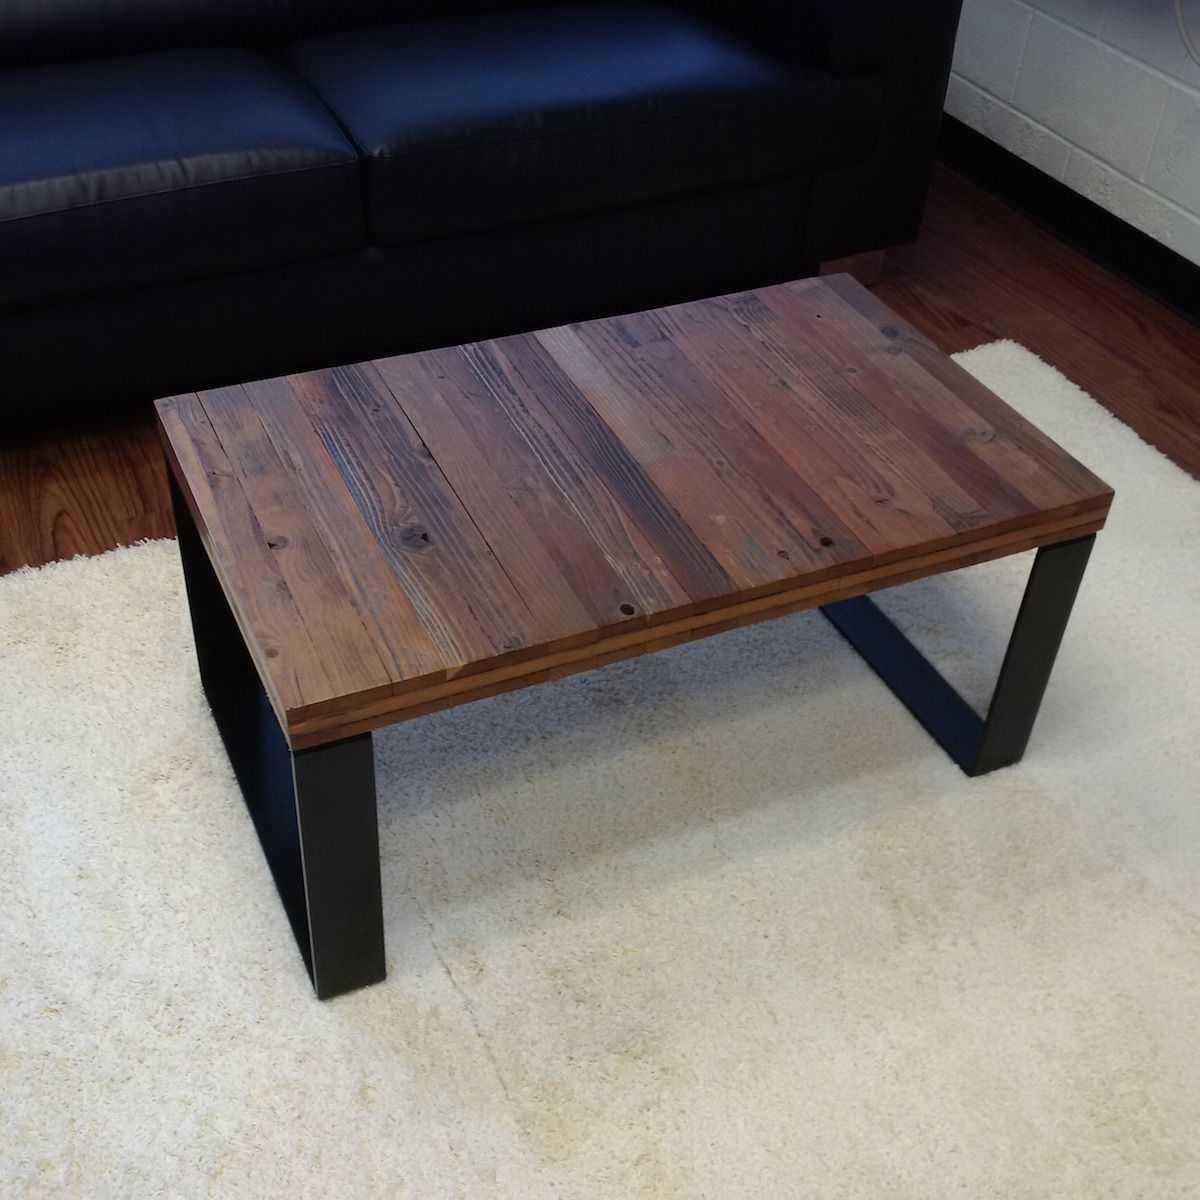 Buy Custom Reclaimed Barn Wood Coffee Table, Made To Order From Sweet Pertaining To Coffee Tables With Storage And Barn Doors (View 15 of 20)